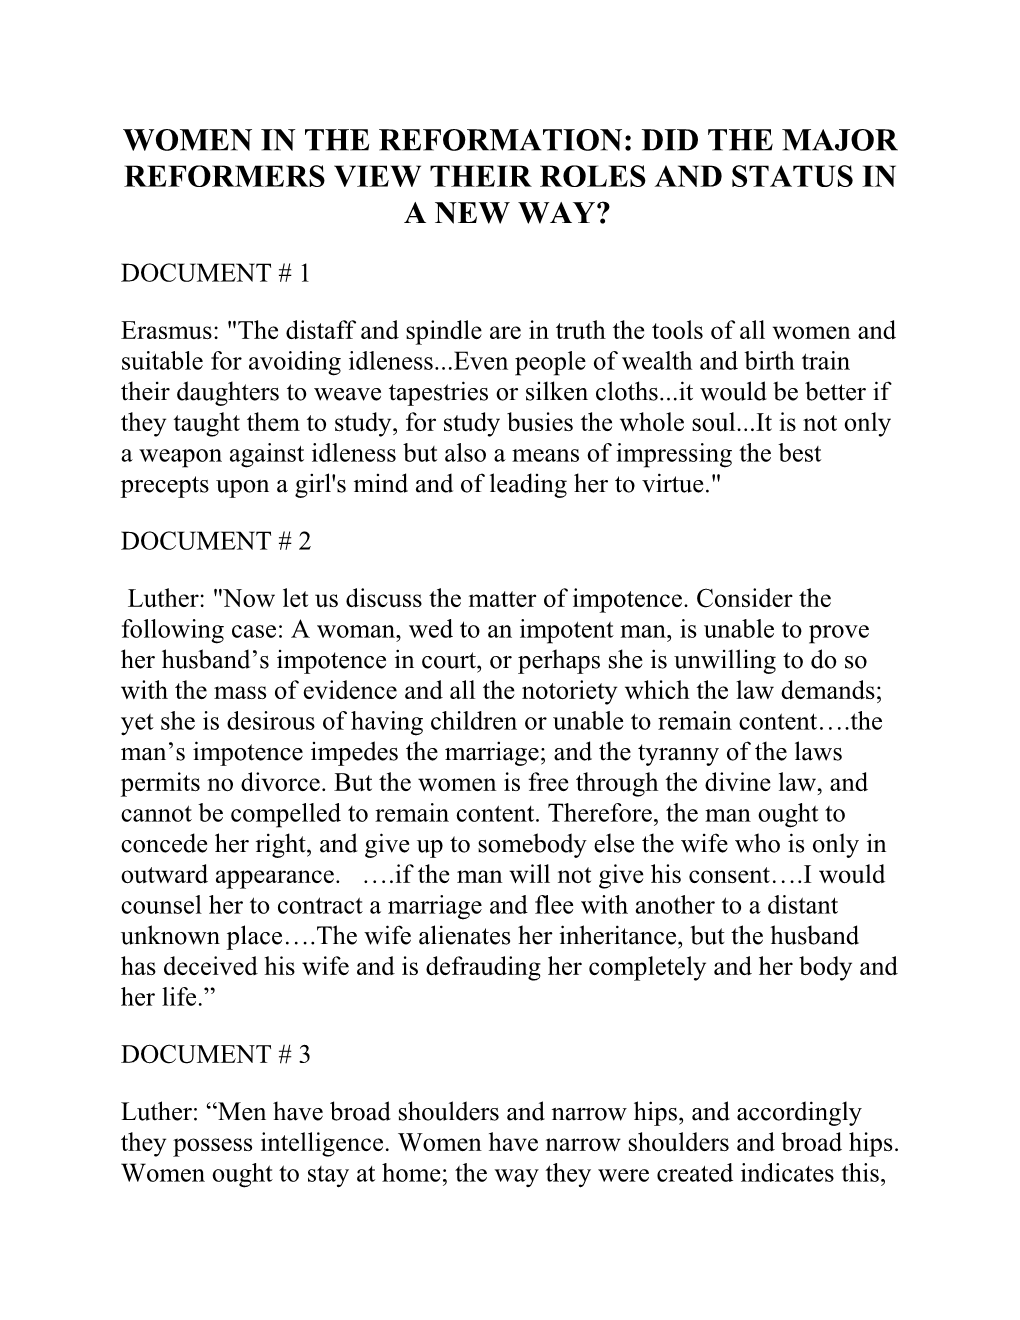 Women in the Reformation: Did the Major Reformers View Their Roles and Status in a New Way?